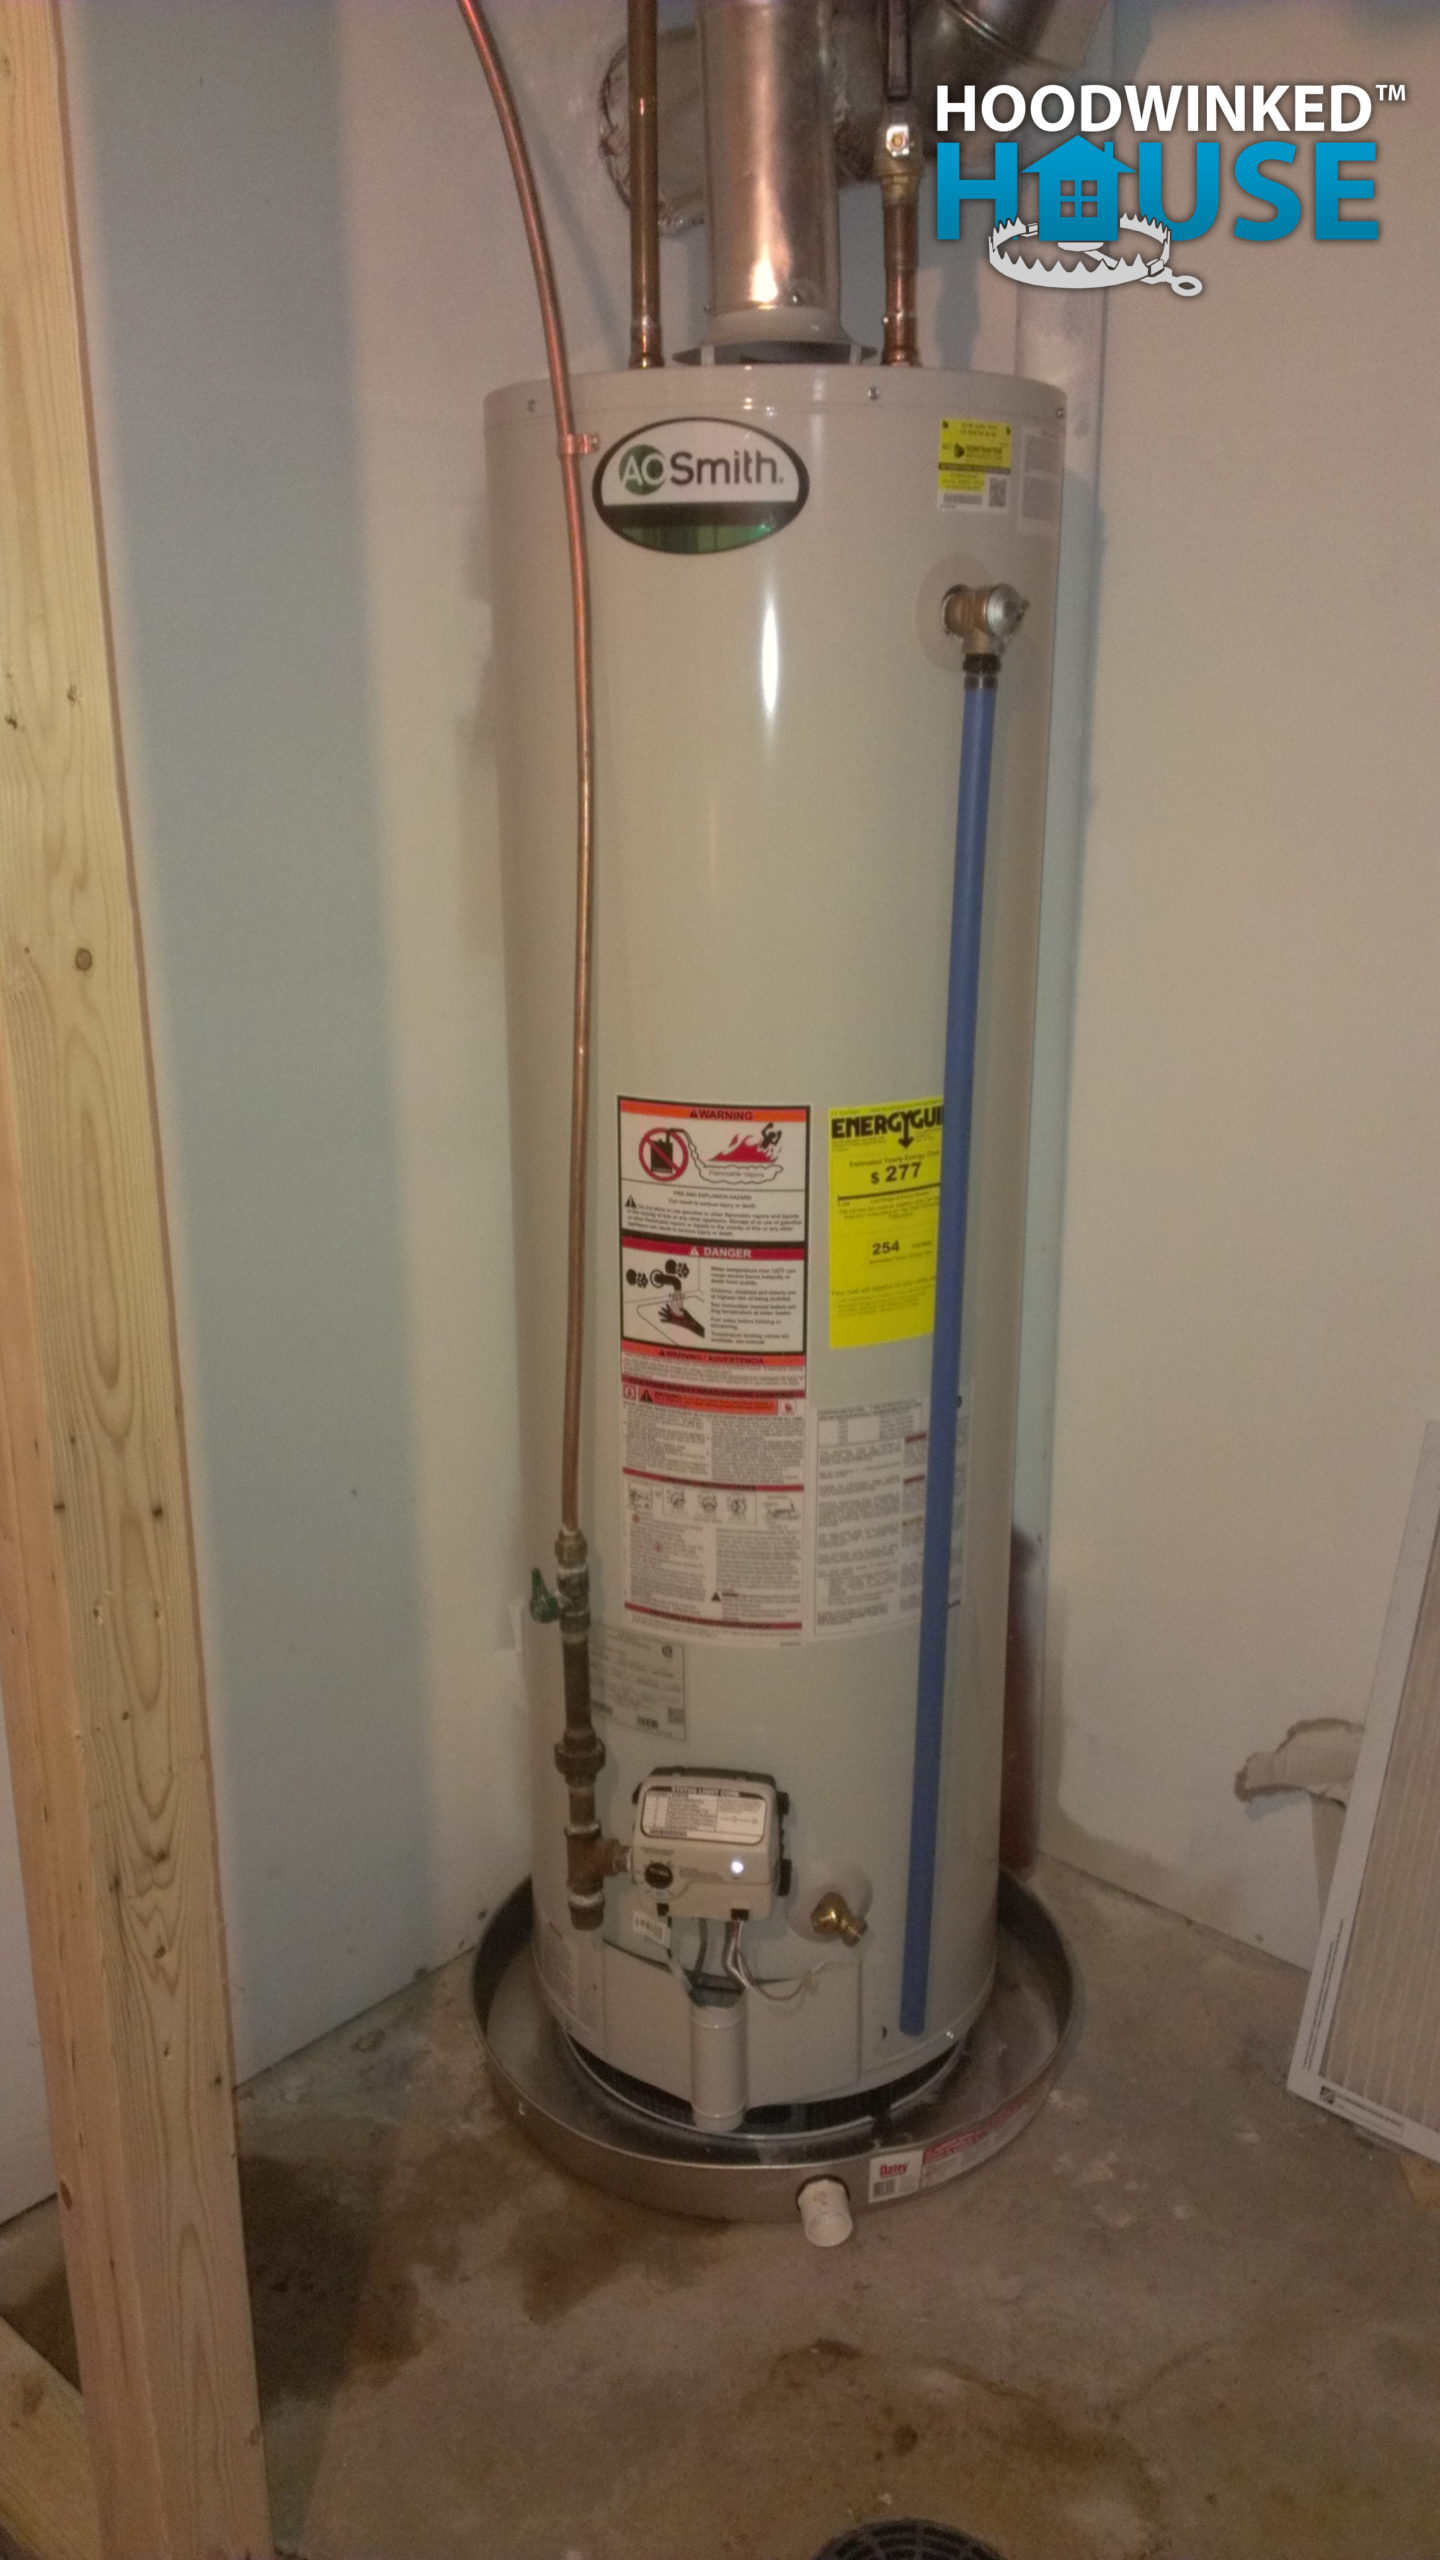 AO Smith water heater installed in a basement with a drip pan.